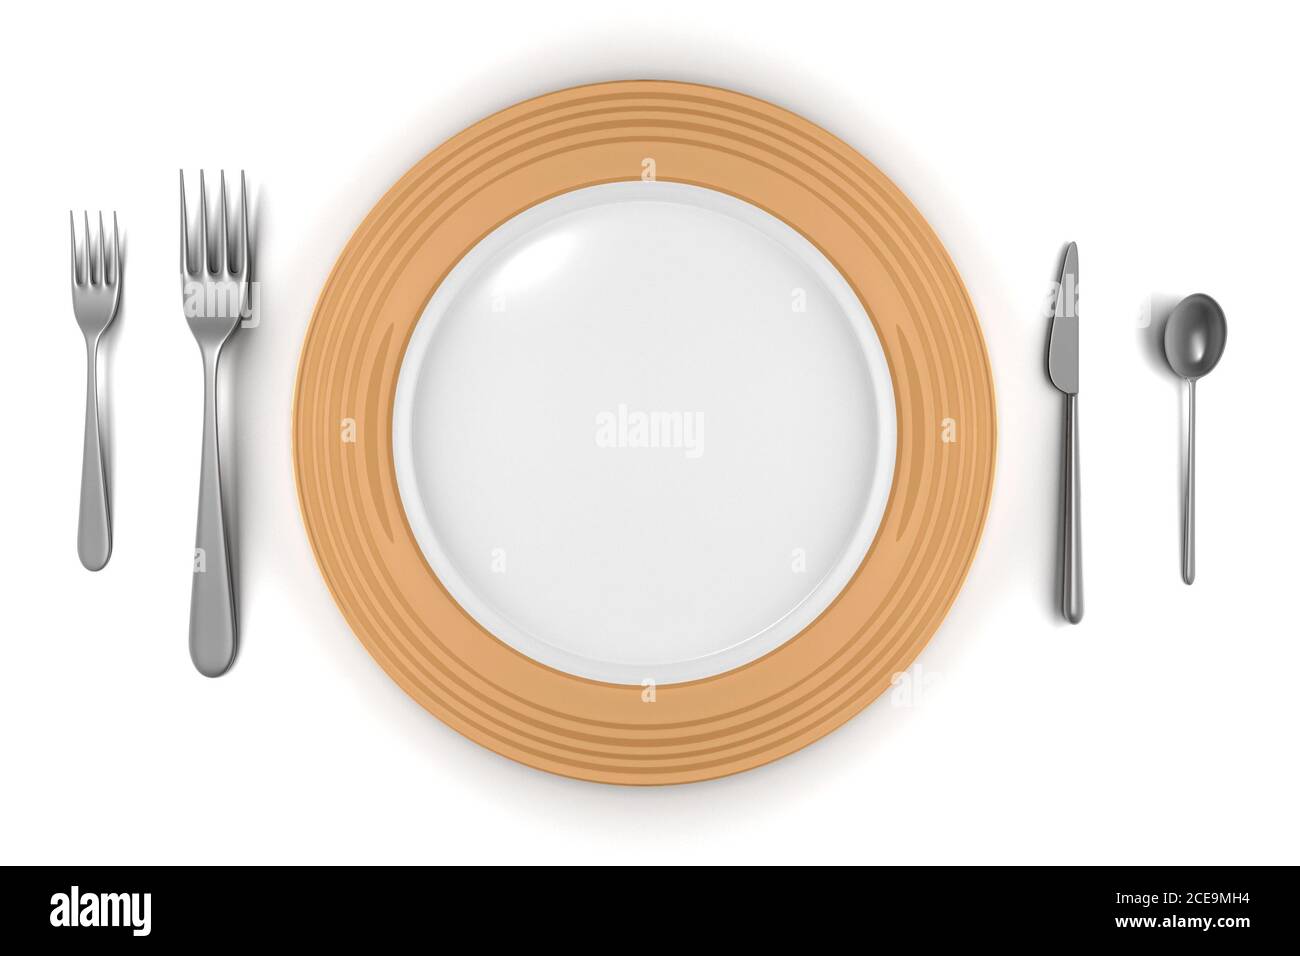 empty plate with knife, forks and spoon isolated Stock Photo